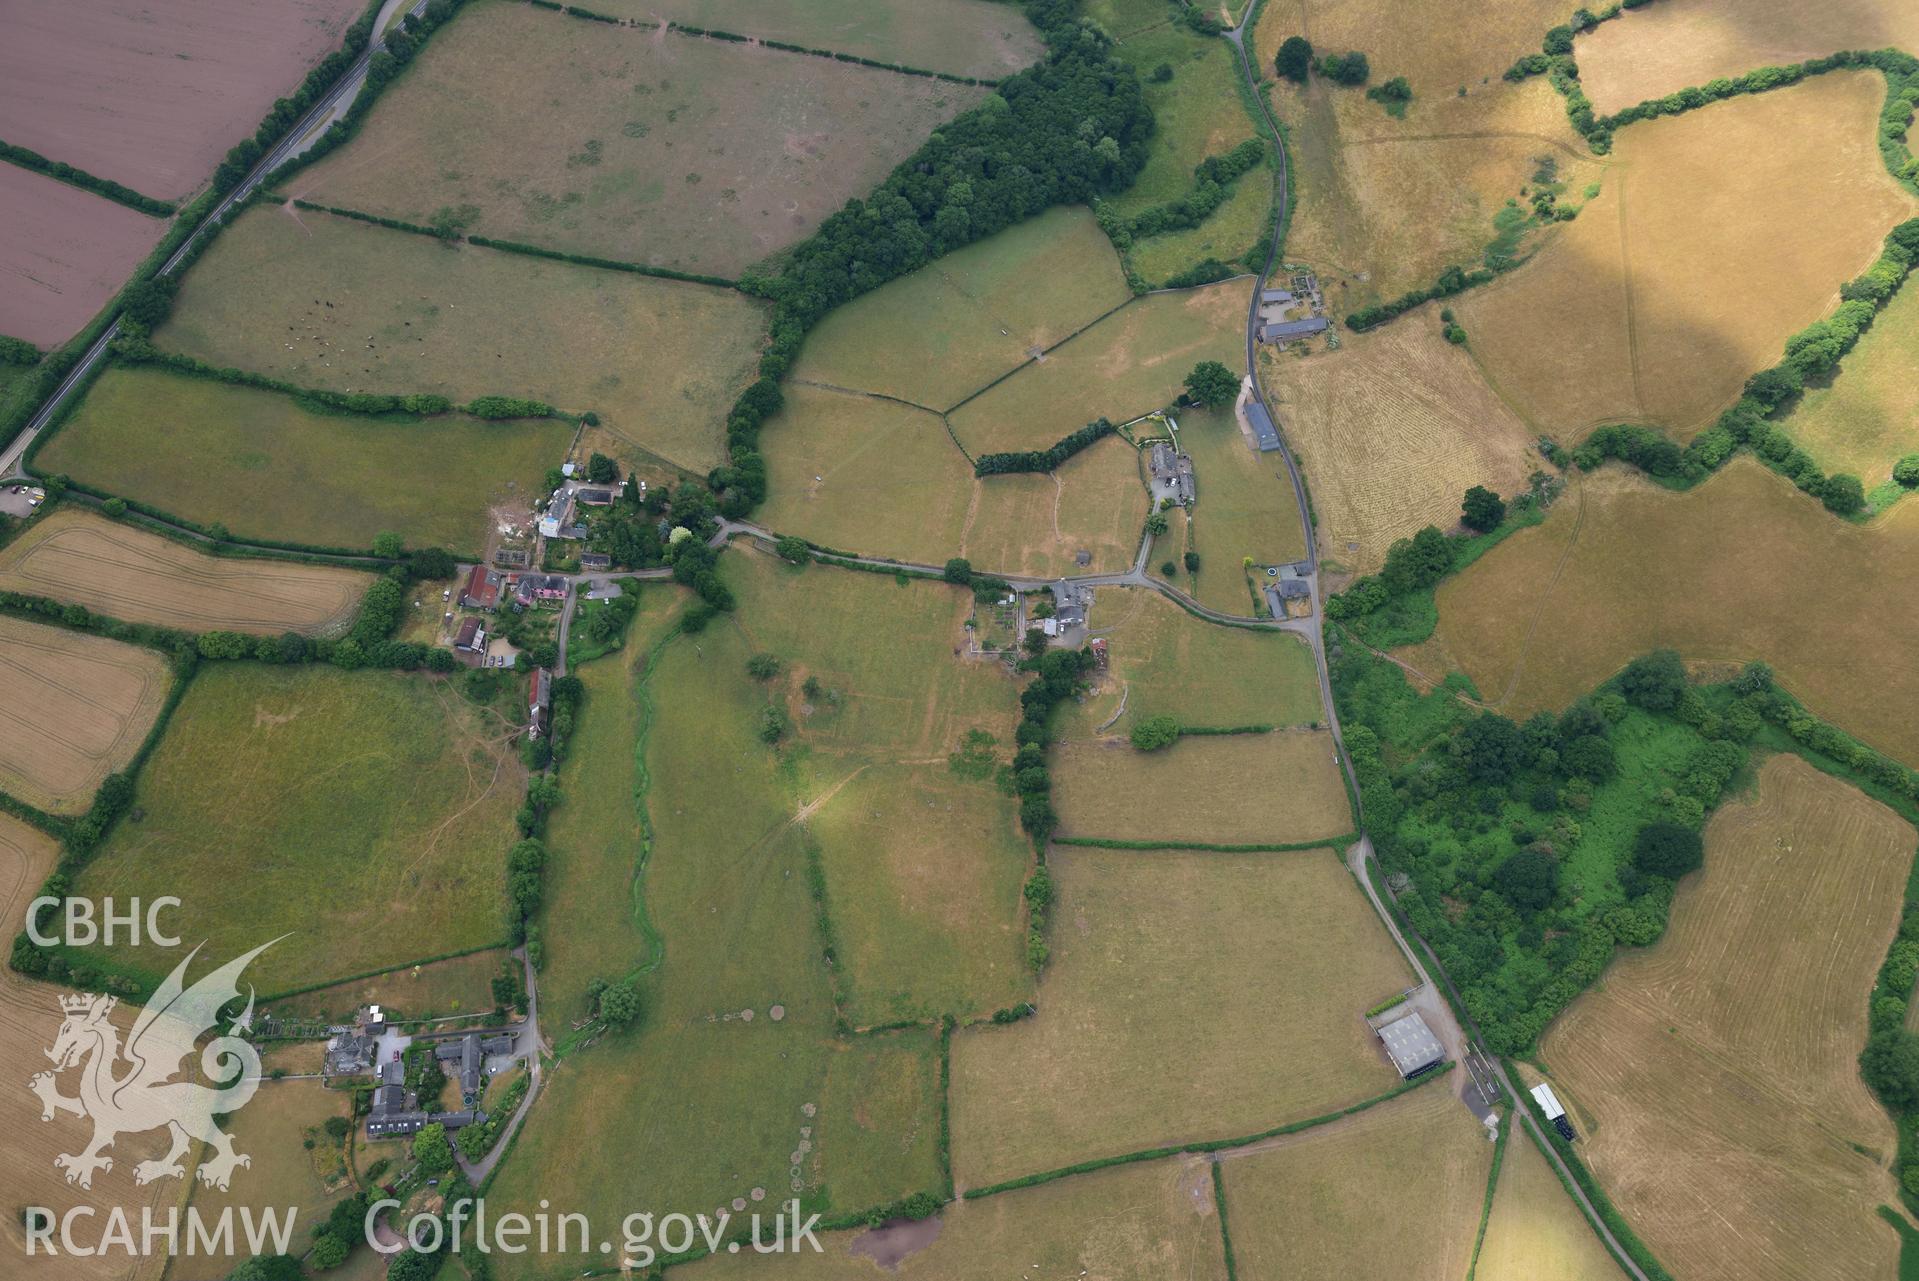 Royal Commission aerial photography of extensive parchmarks at Pen y Gaer Roman fort, including the internal plan and extramural buildings, taken on 19th July 2018 during the 2018 drought.